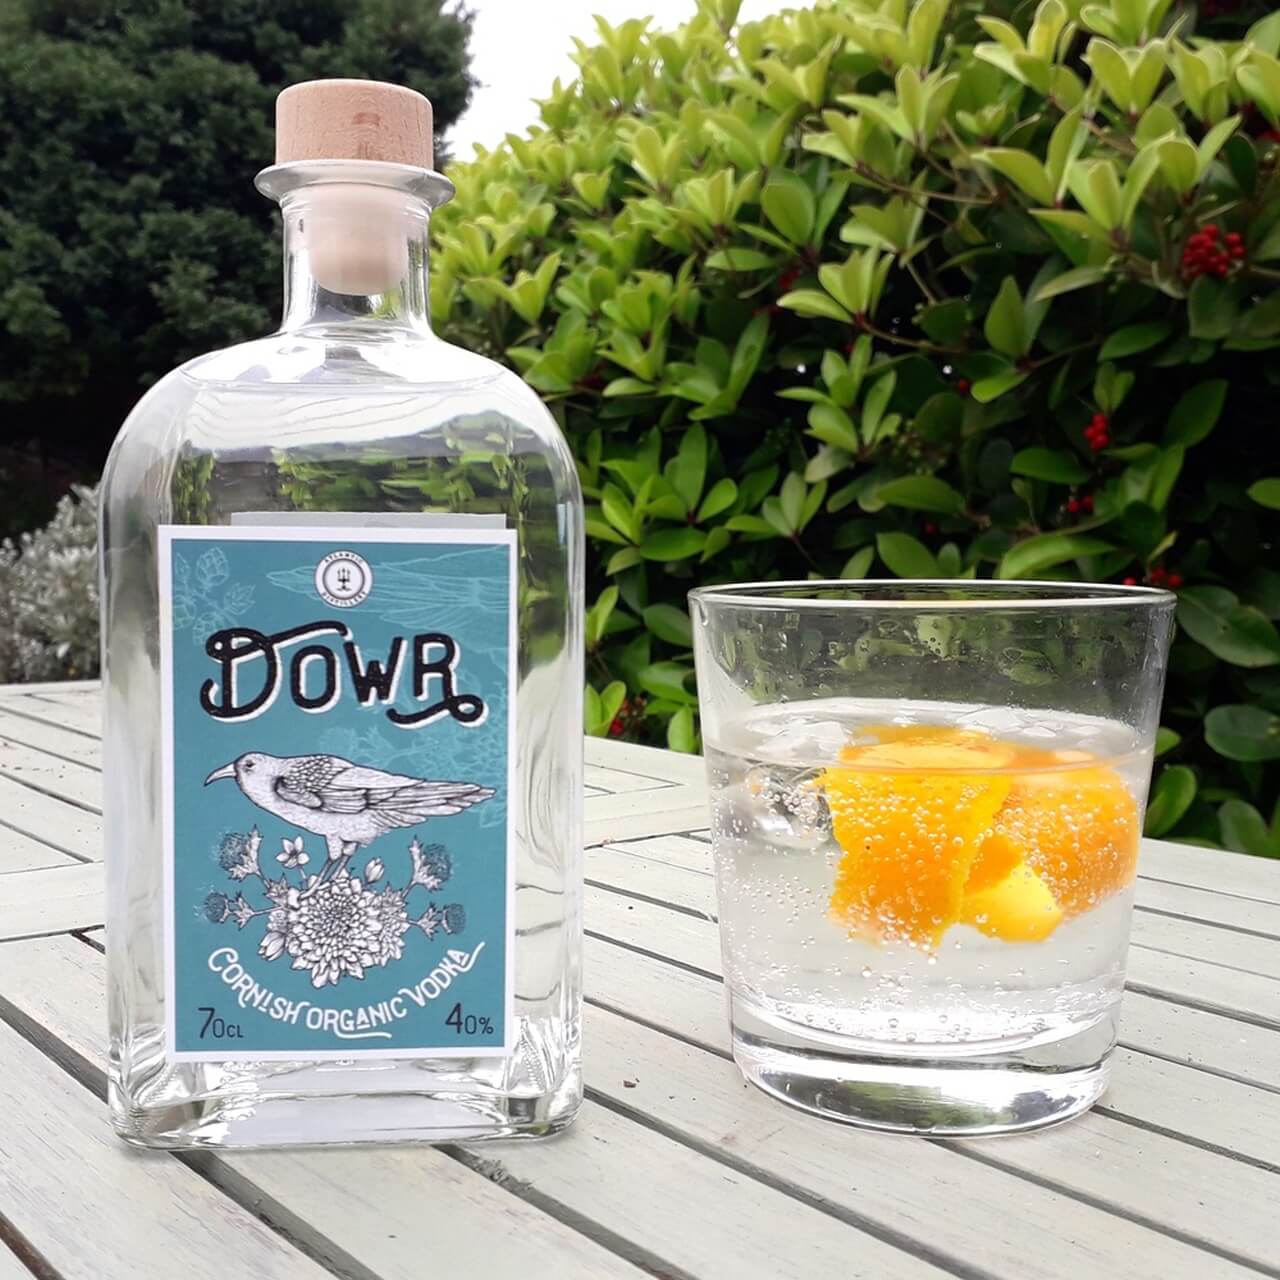 Image of Dowr Organic Cornish Vodka by Atlantic Distillery, designed, produced or made in the UK. Buying this product supports a UK business, jobs and the local community.